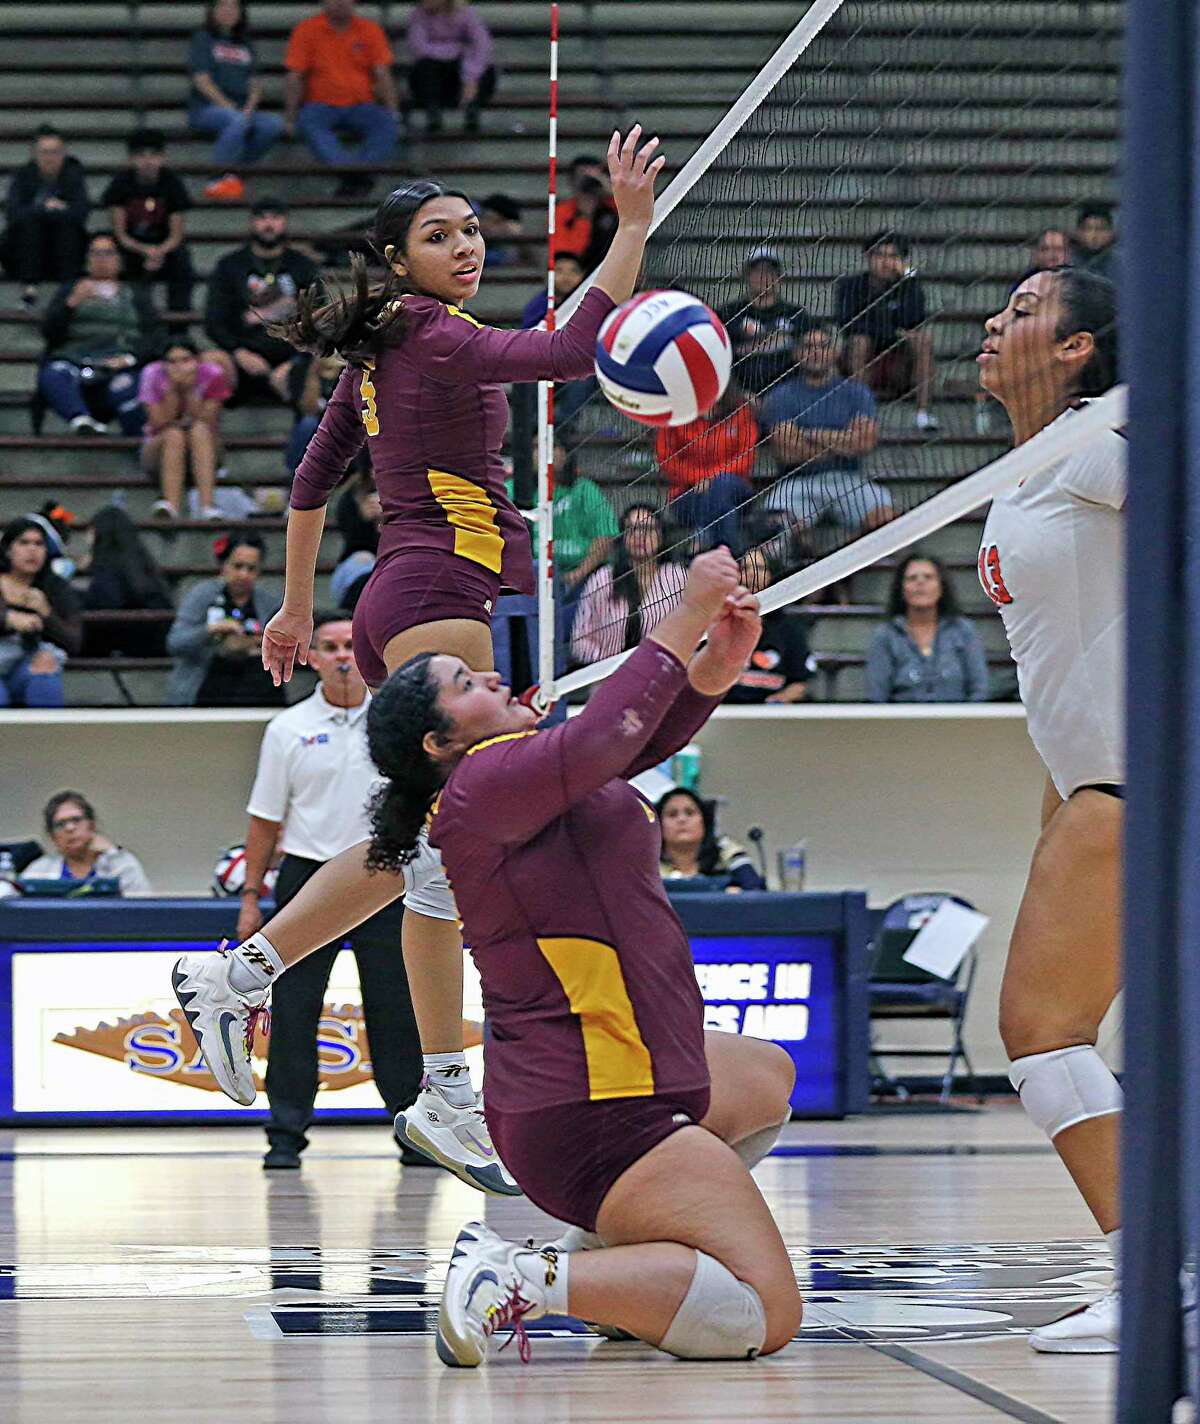 Harlandale Cayla Reyes #16 makes a save against Burbank in a long point in the third game in a first-round volleyball playoff on Tuesday, Nov.1, 2022 at Alamo Convocation Center. Harlandale defeated Burbank 3-0.